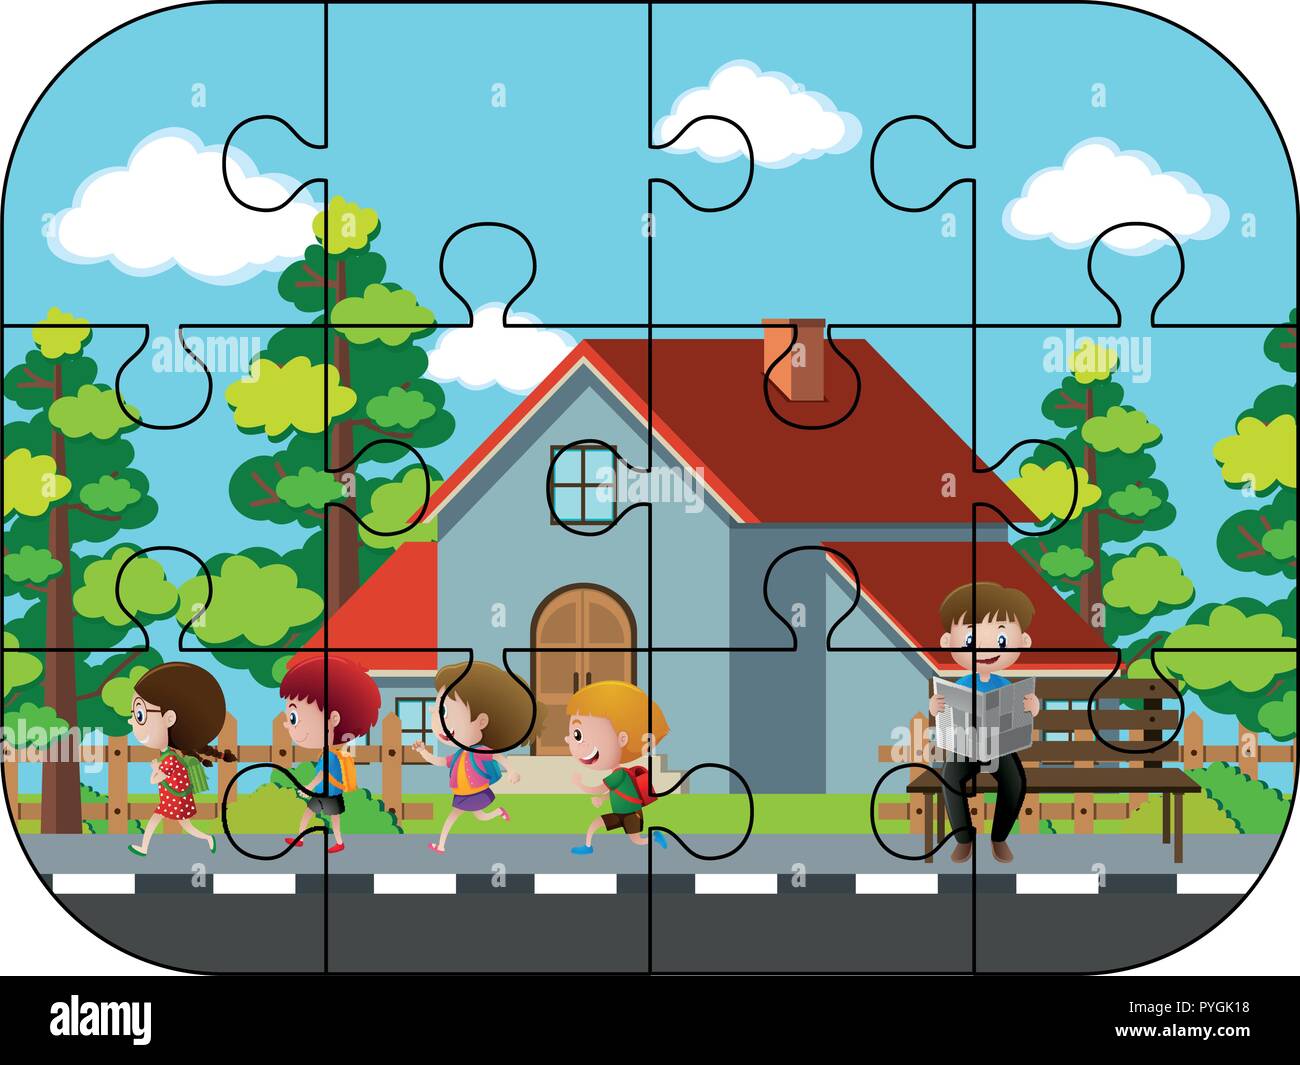 Jigsaw puzzle game with kids walking in park Vector Image